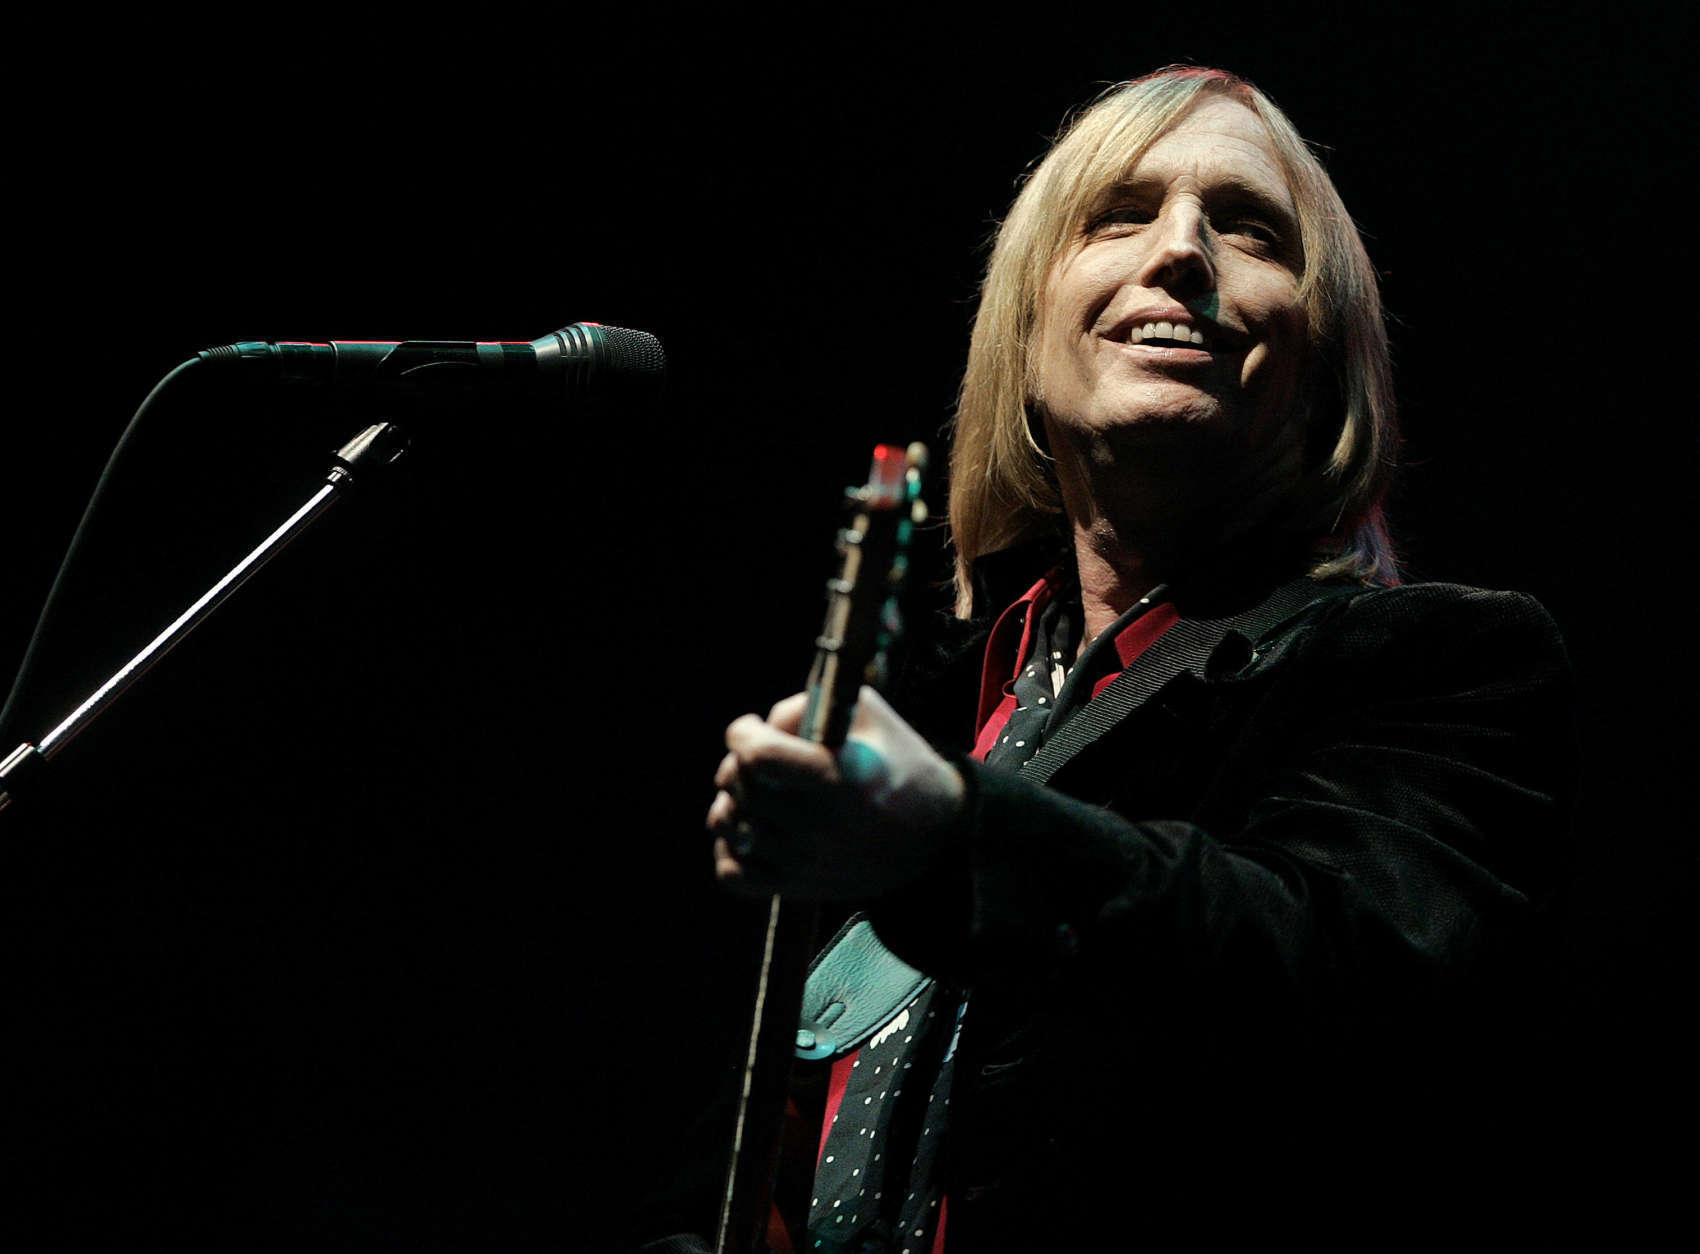 Tom Petty and the Heartbreakers perform at the Bonnaroo Music &amp; Arts Festival in Manchester, Tenn., on Friday, June 16, 2006. (AP Photo/Mark Humphrey)